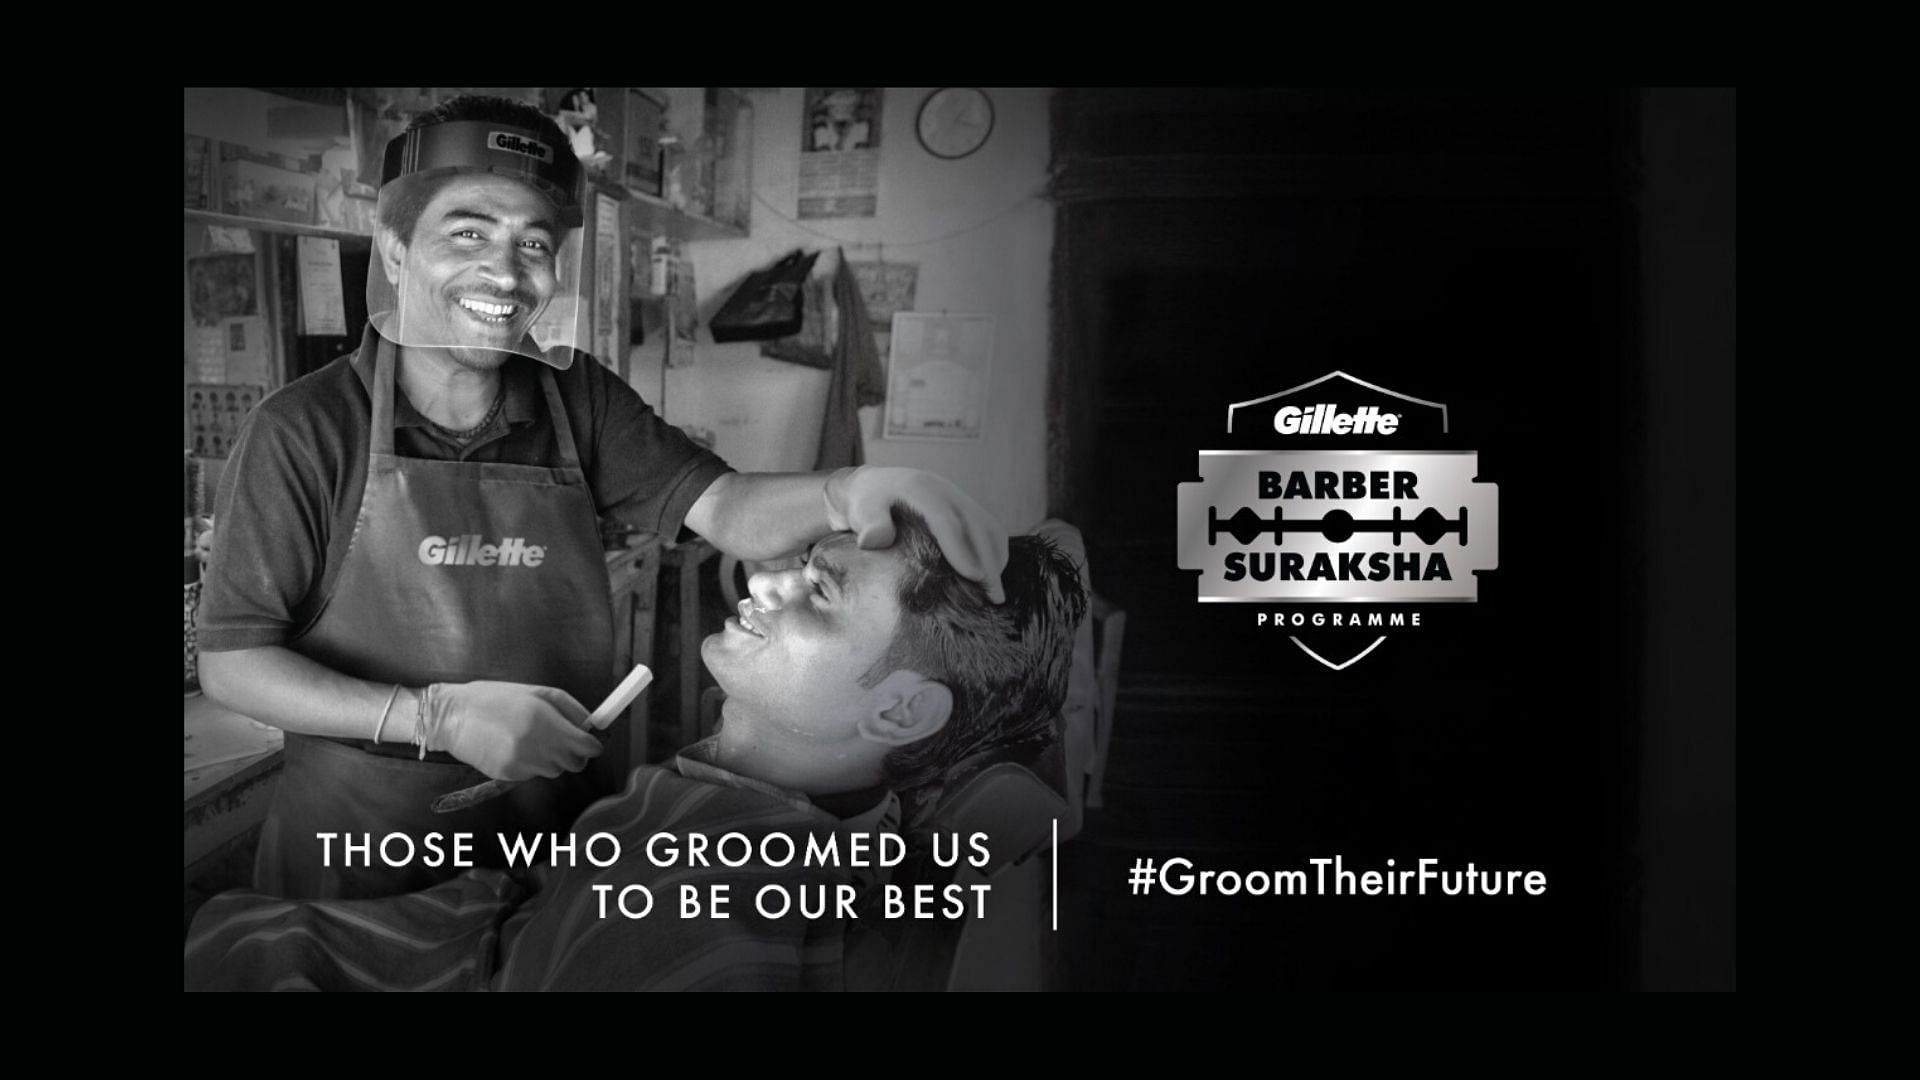 Gillette Barber Suraksha Programme aims to educate, empower and protect barbers